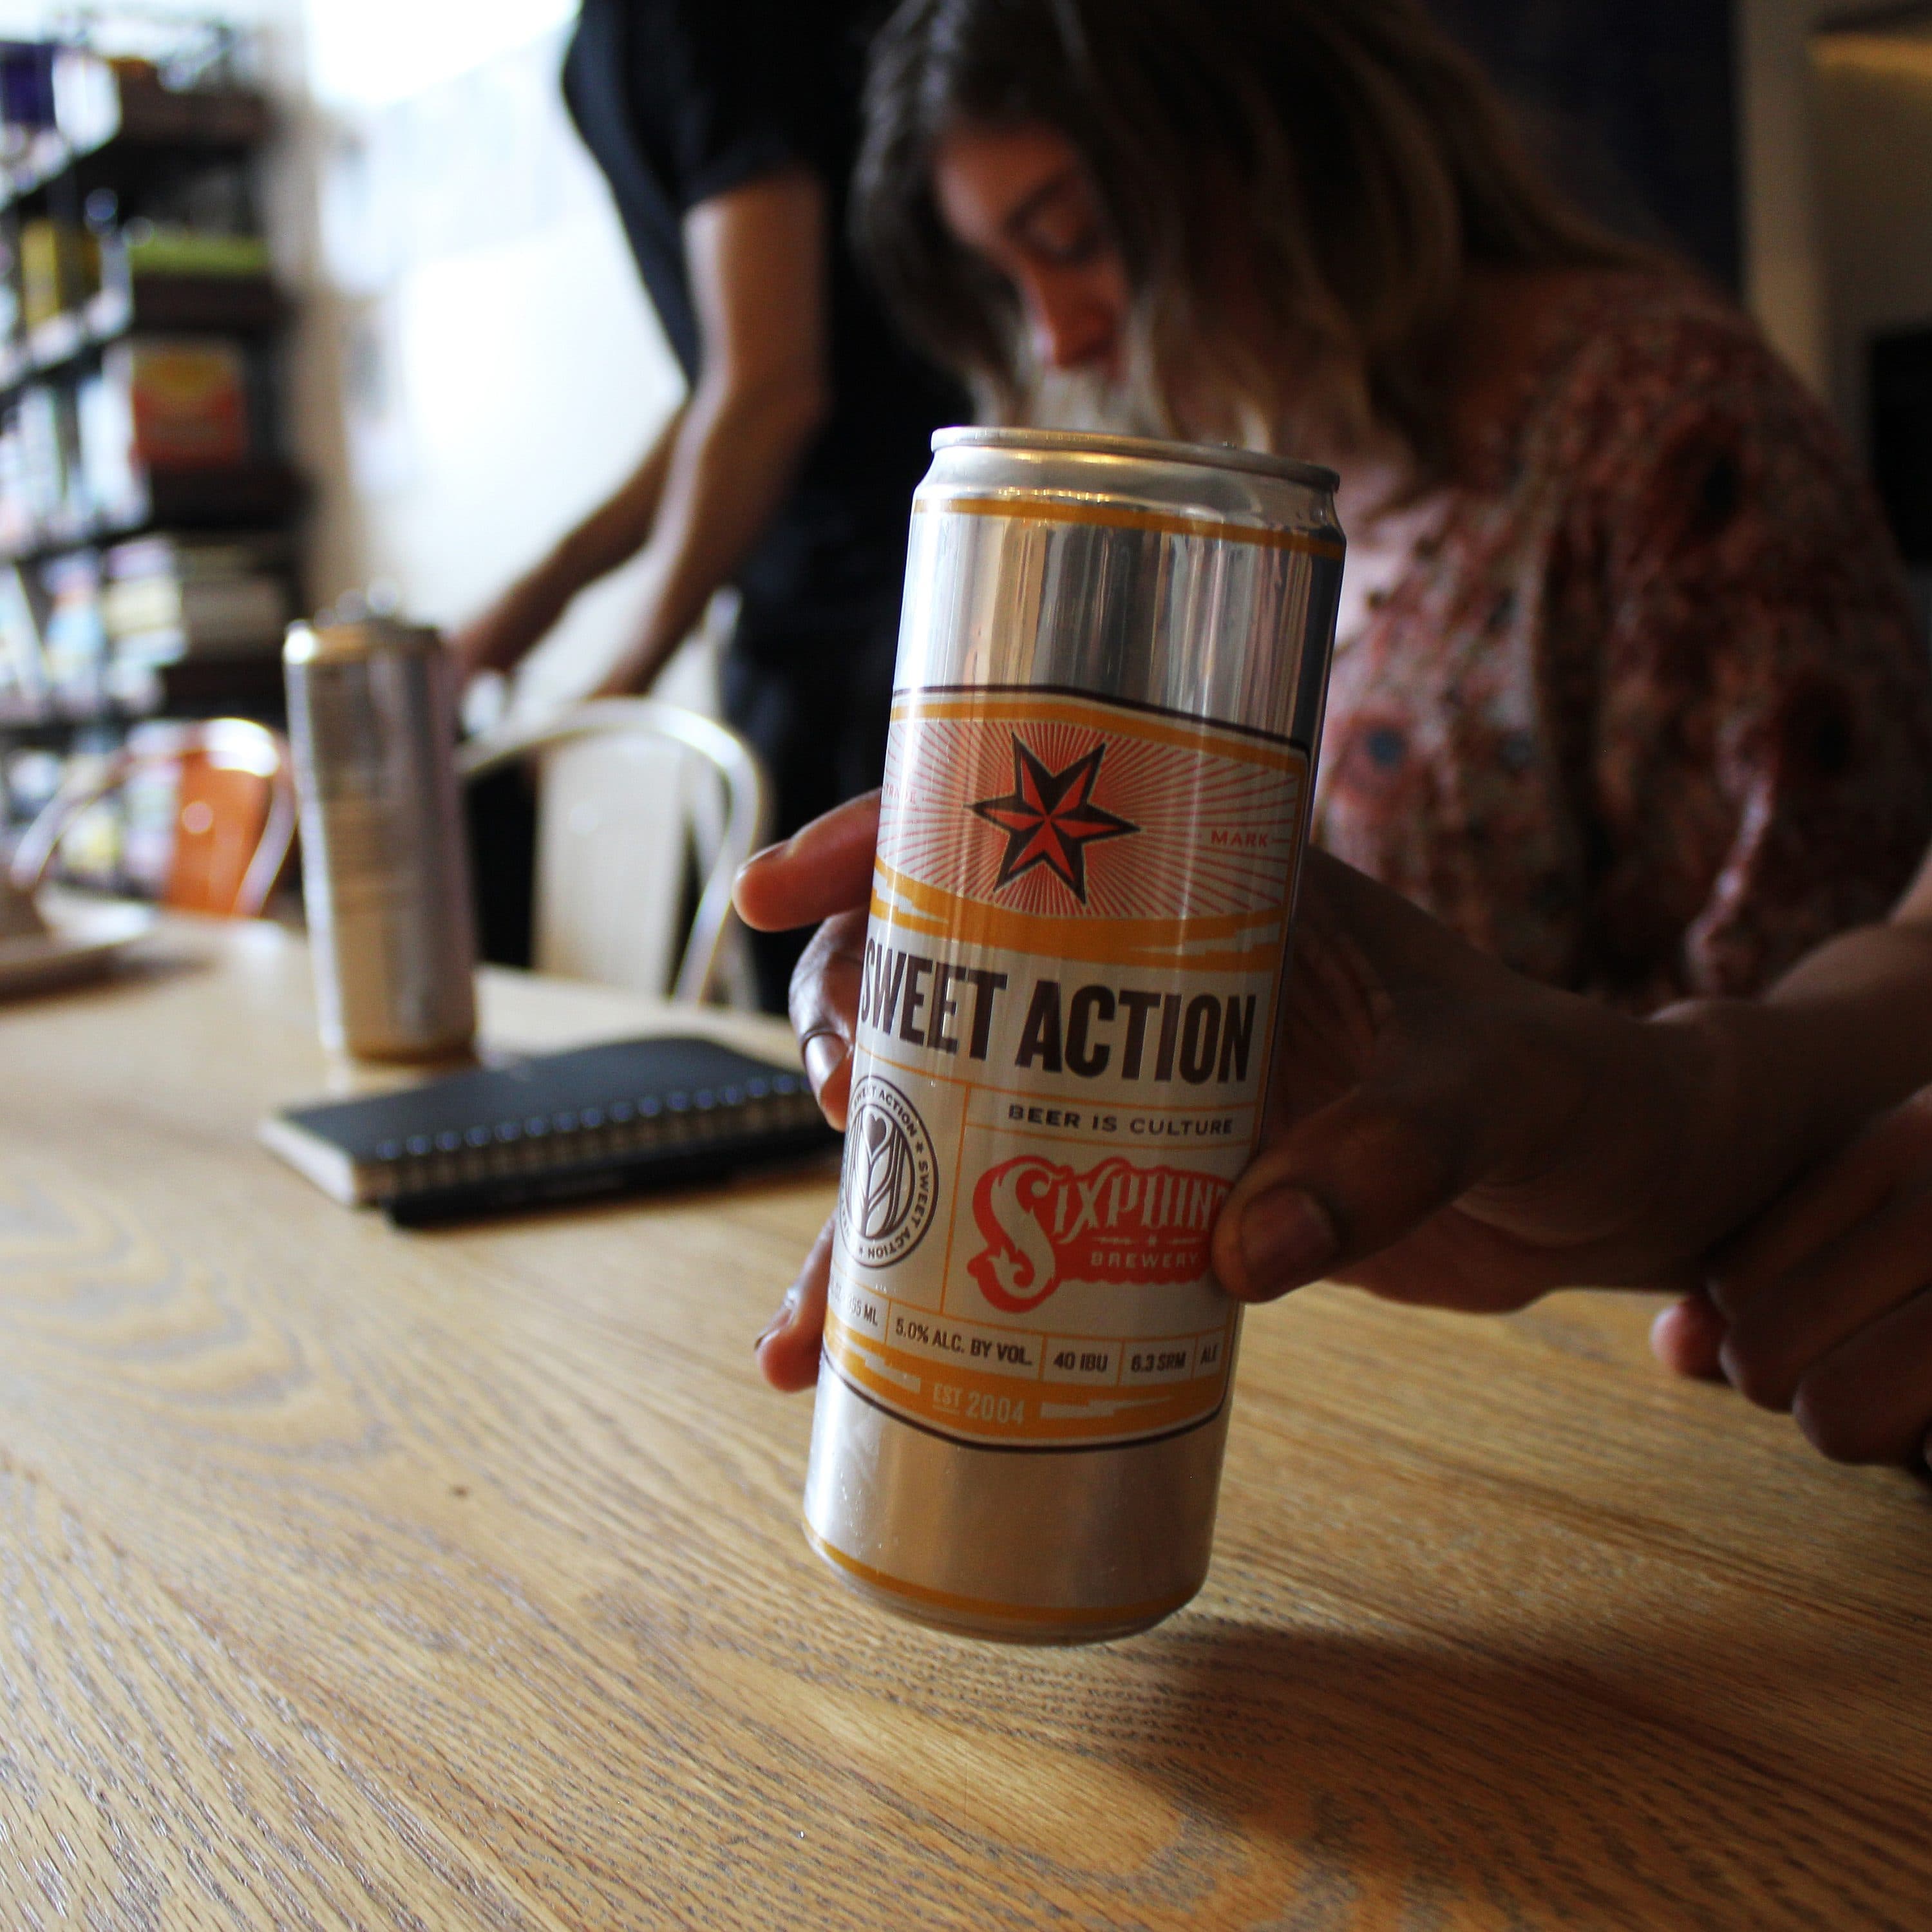 A person holds a can of Sixpoint Brewery's Sweet Action beer over a wooden table. In the background, two other people are partially visible—one seated and the other standing. The scene is indoors, with bookshelves and a refrigerator in the background.